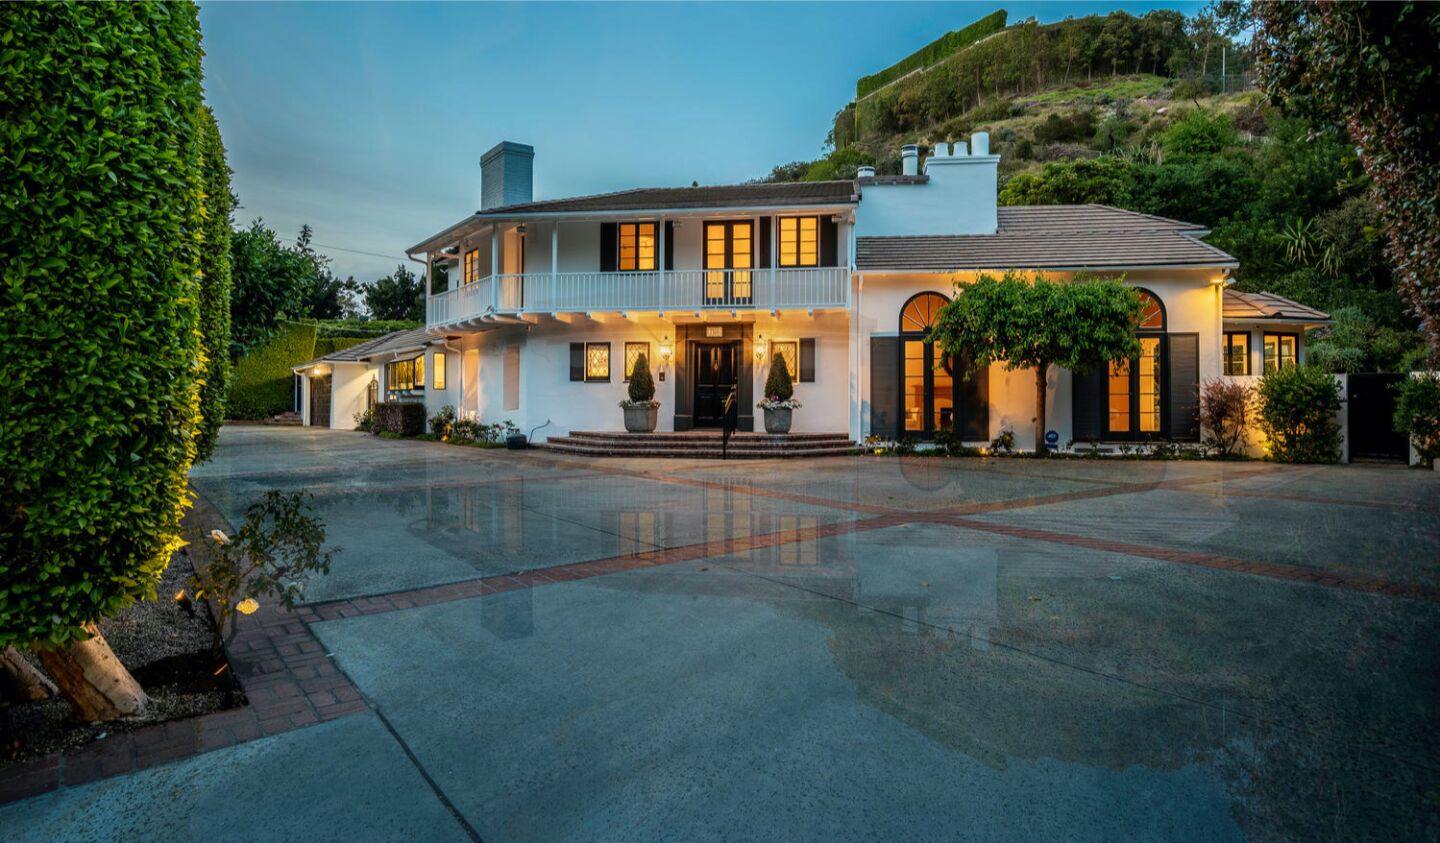 Jerry Buss' one-time Bel-Air home